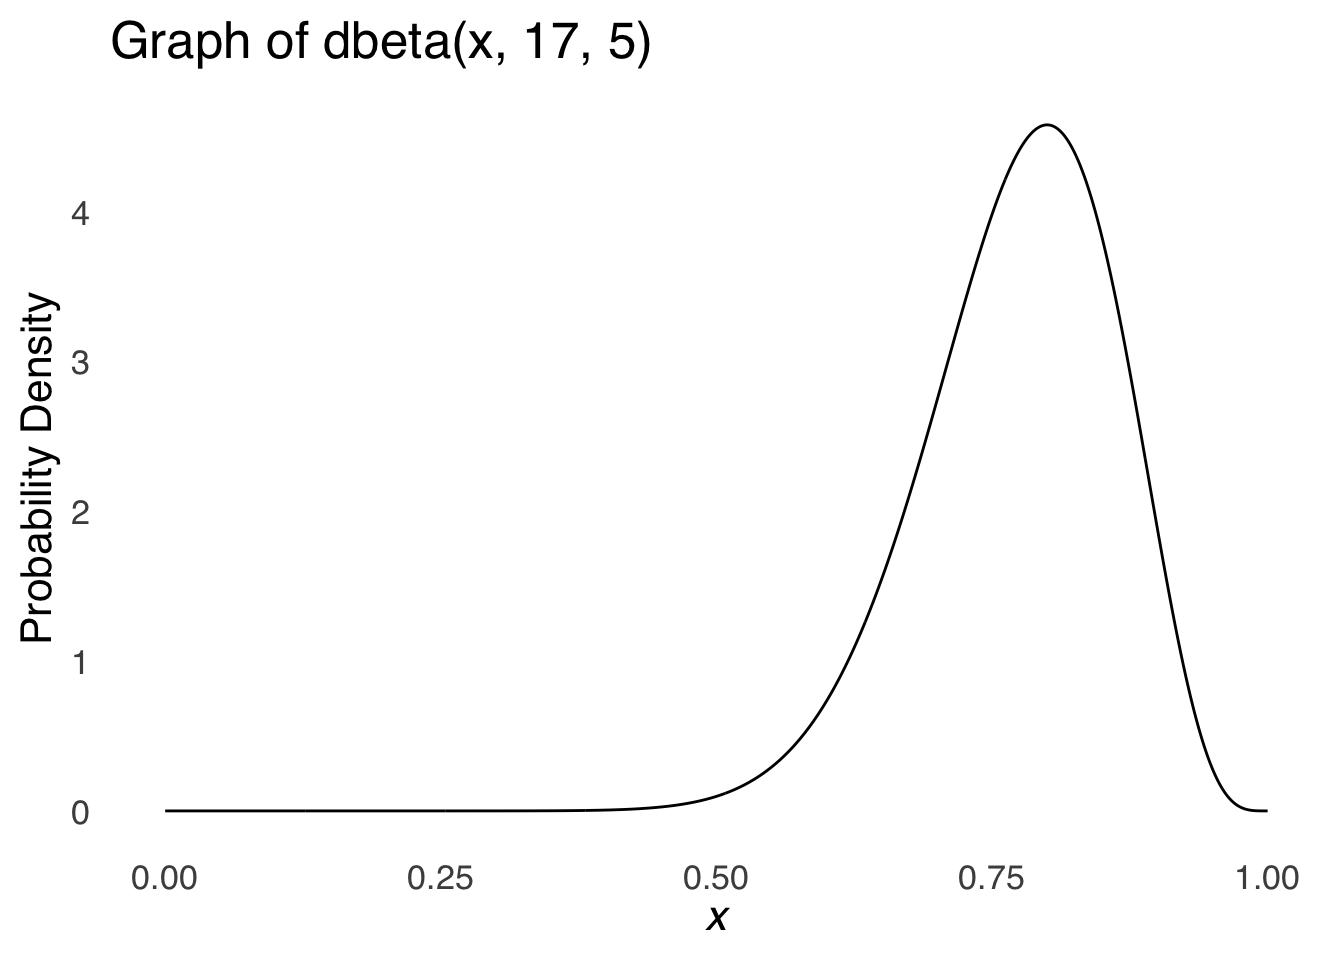 A $\beta$ distribution with $s+1=17$ and $f+1=5$